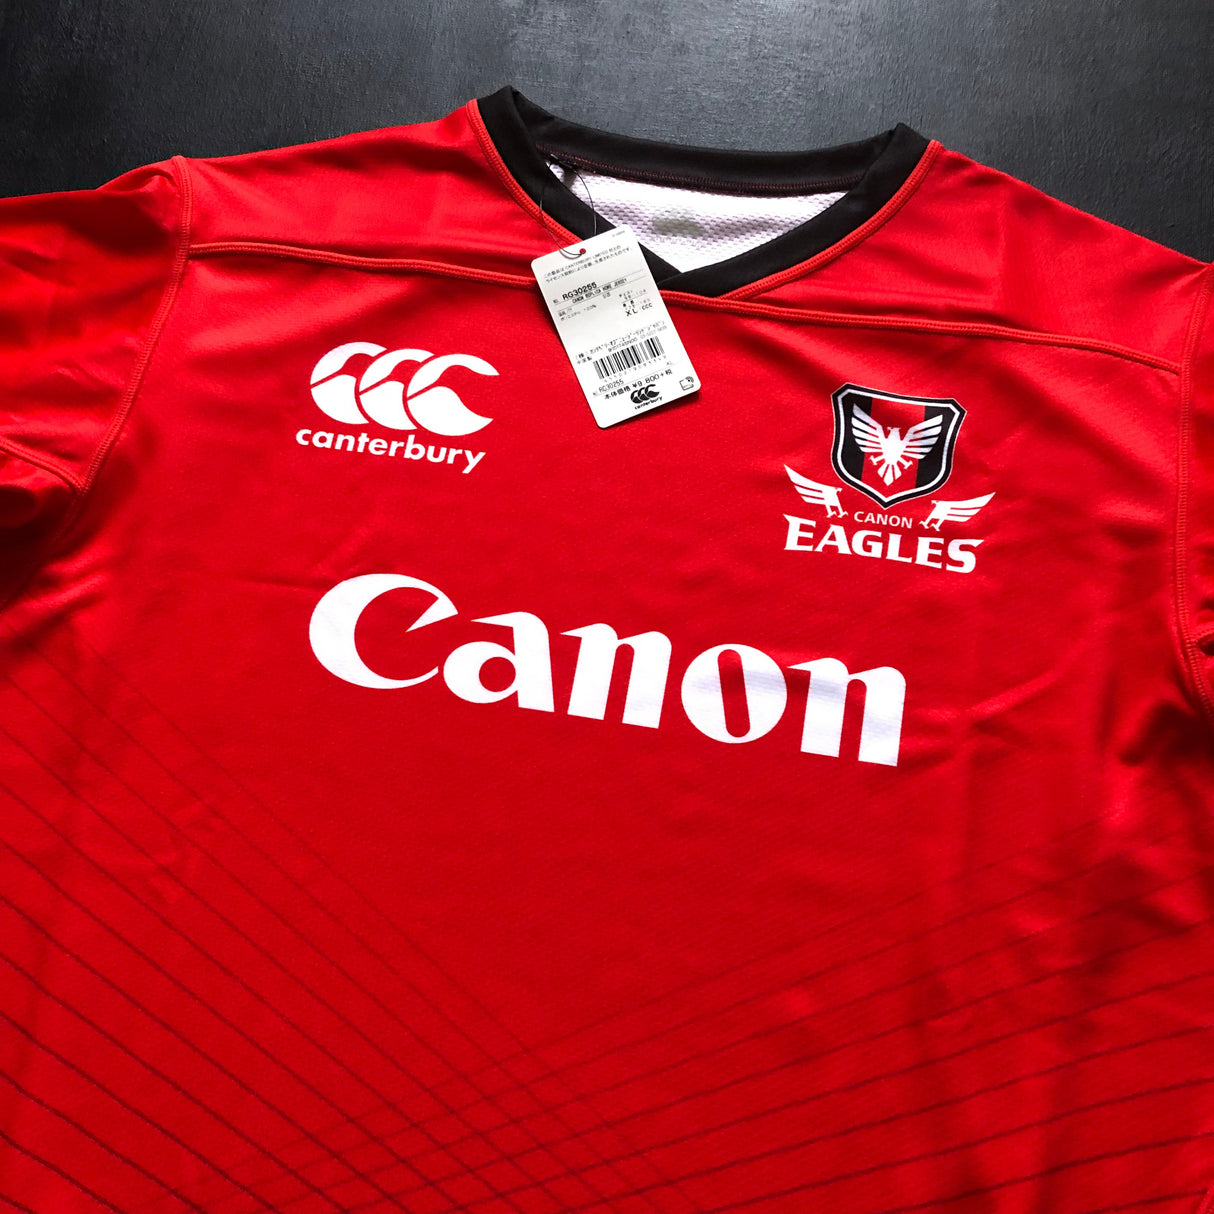 Canon Eagles Rugby Team Jersey 2020 (Japan Top League) XL BNWT Underdog Rugby - The Tier 2 Rugby Shop 